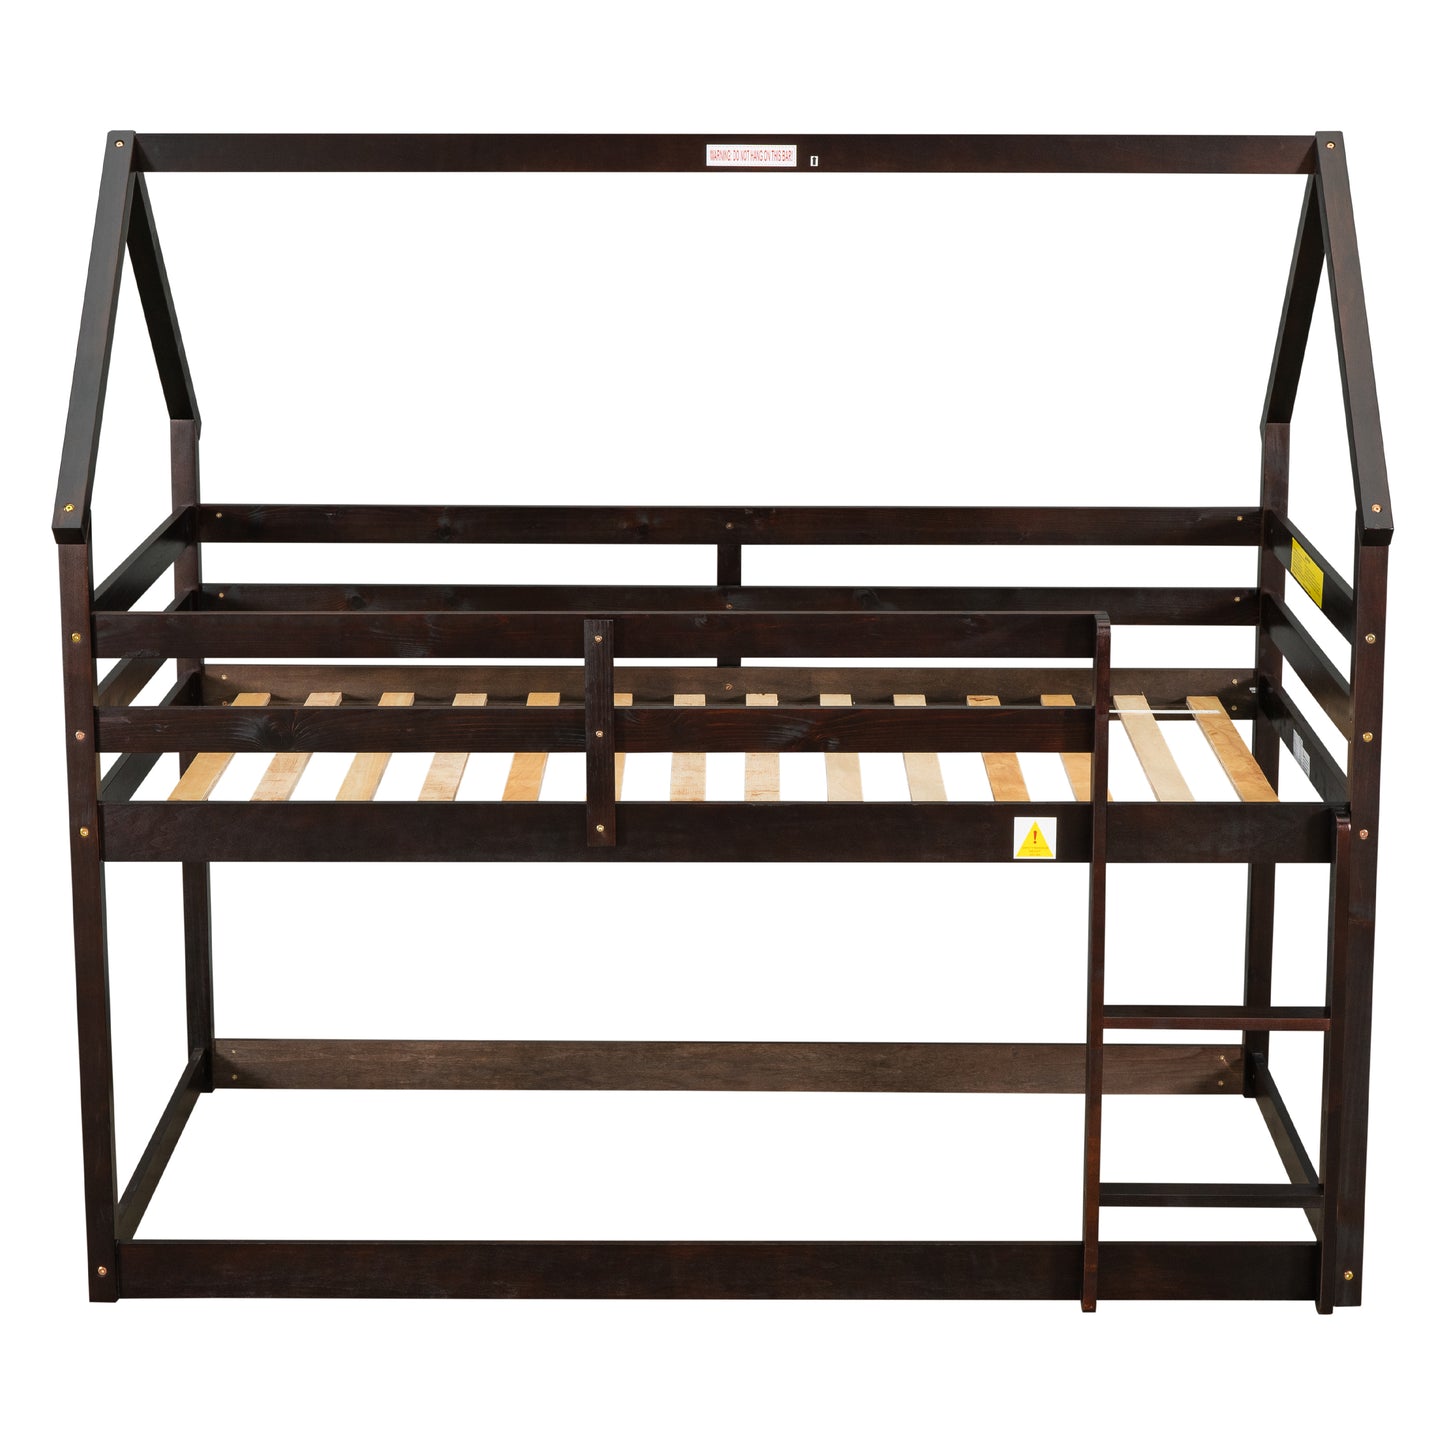 Twin over Twin Loft Bed with Roof Design, Safety Guardrail, Ladder, Espresso